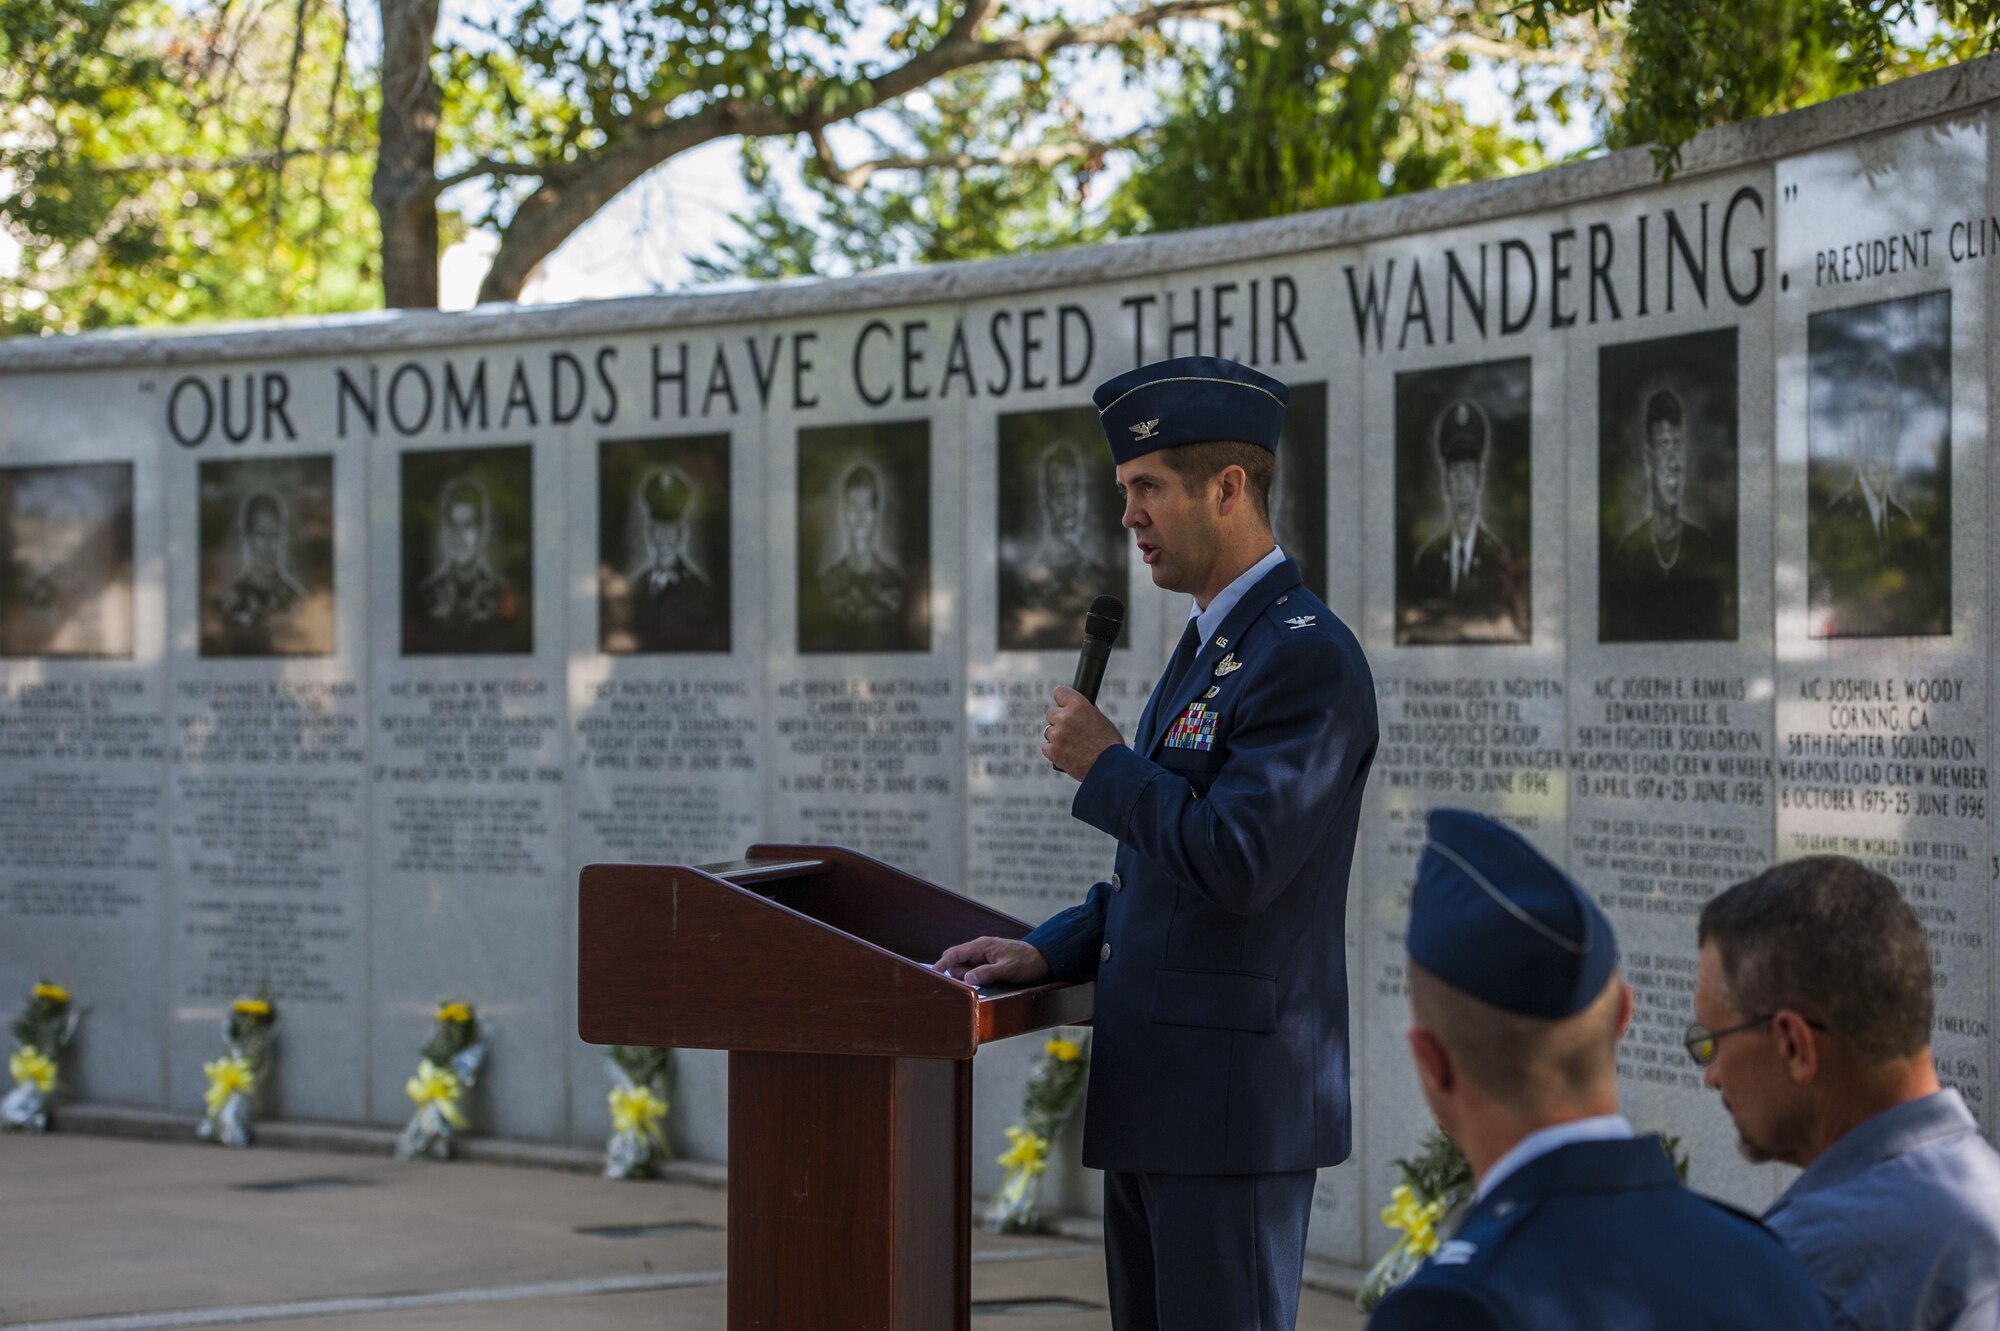 Col. Lance Pilch, 33rd Fighter Wing commander, speaks during the 19th anniversary Khobar Tower memorial ceremony, June 25, 2015, on Eglin Air Force Base, Florida. On June 25, 1996, a truck-bomb was detonated adjacent to Khobar Tower in Dhahran, Saudi Arabia, that resulted in 400 injured U.S. and international military and civilian members. (U.S. Air Force photo/Staff Sgt. Marleah Robertson) 